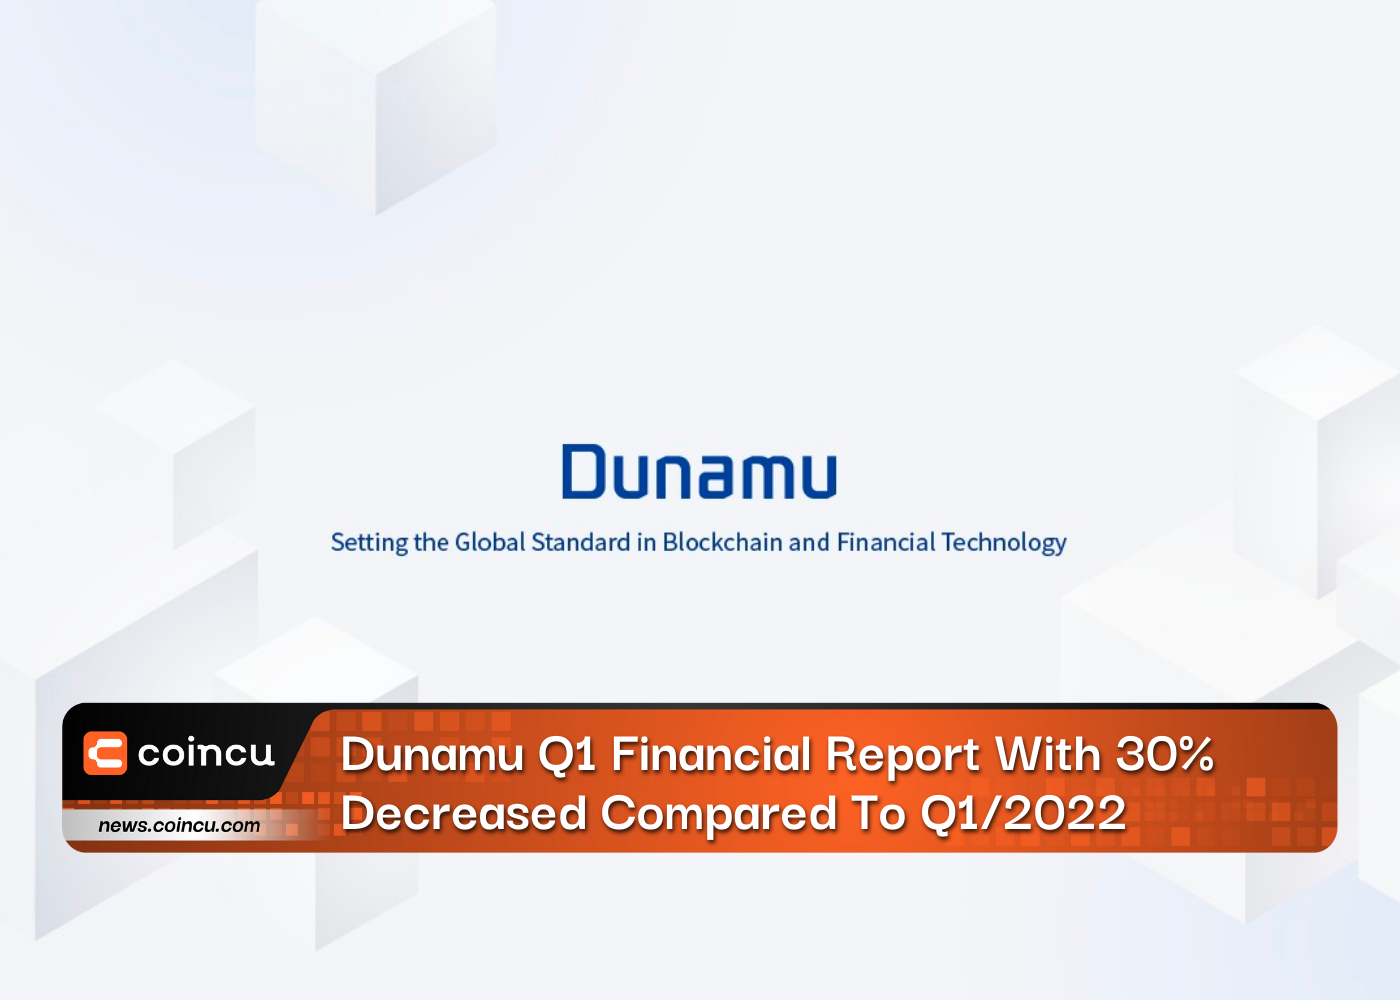 Dunamu Q1 Financial Report With 30% Decreased Compared To Q1/2022